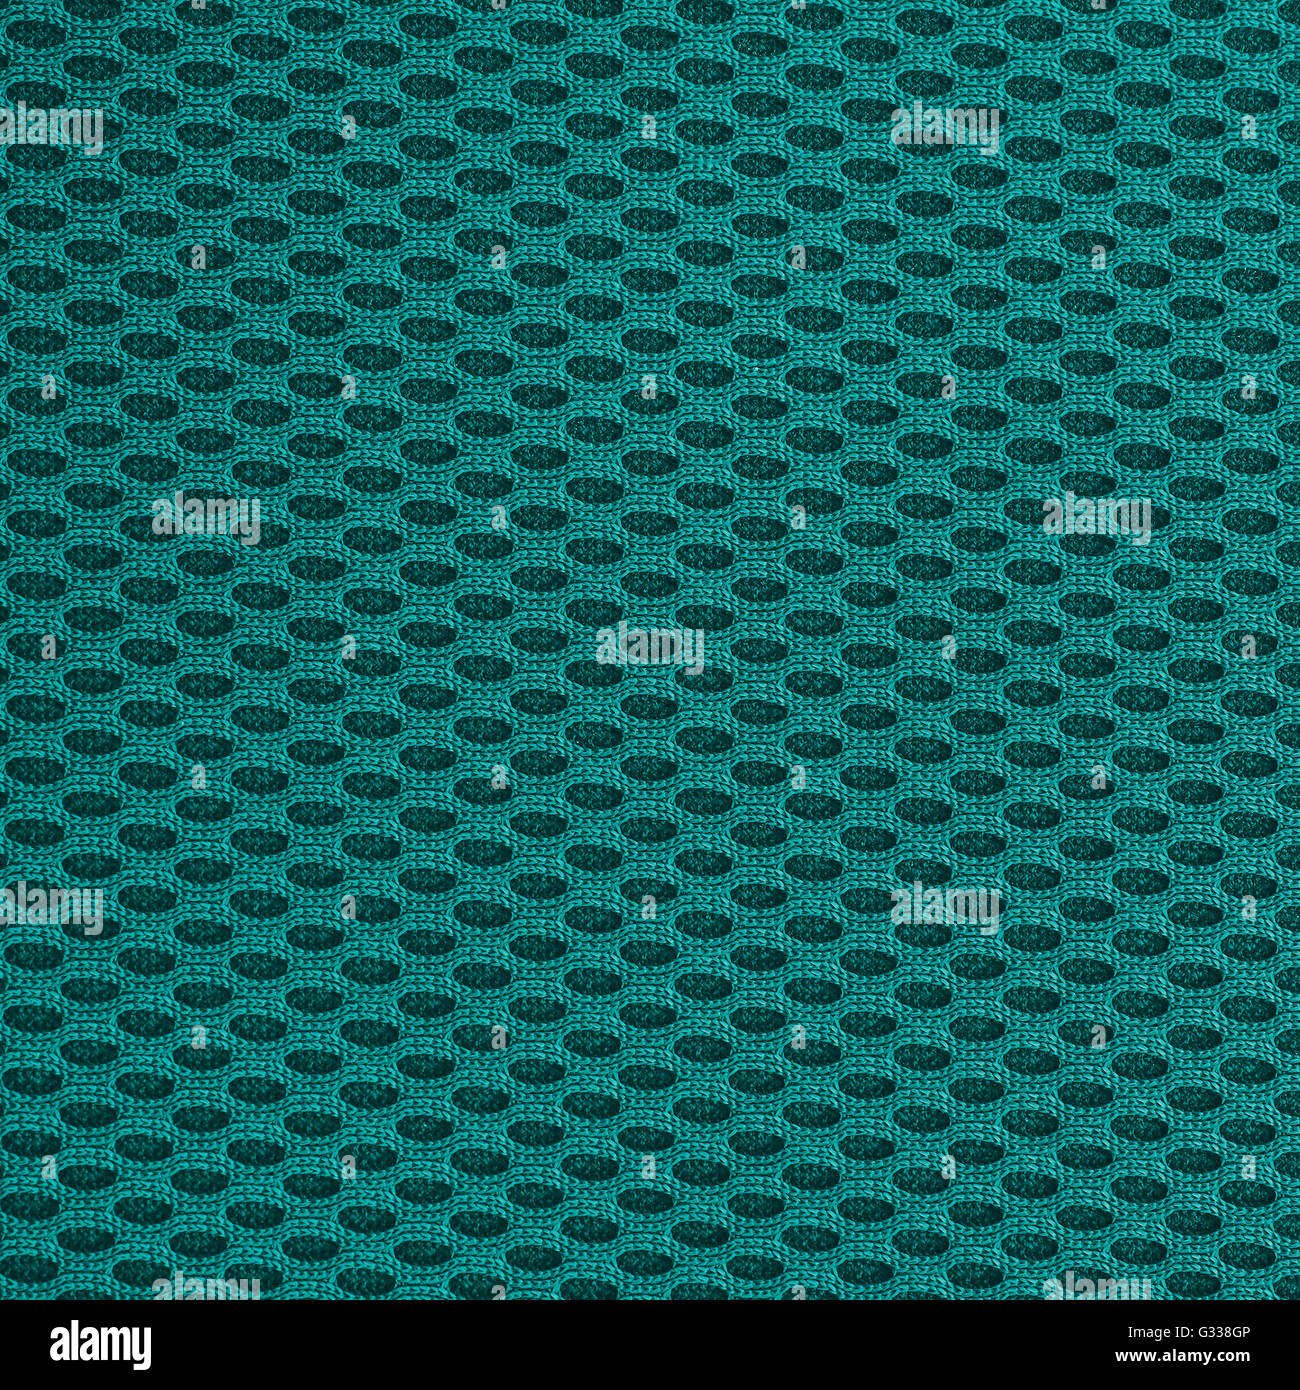 Turquoise teal  multilayer fiber fabric texture. Close up, top view. Stock Photo